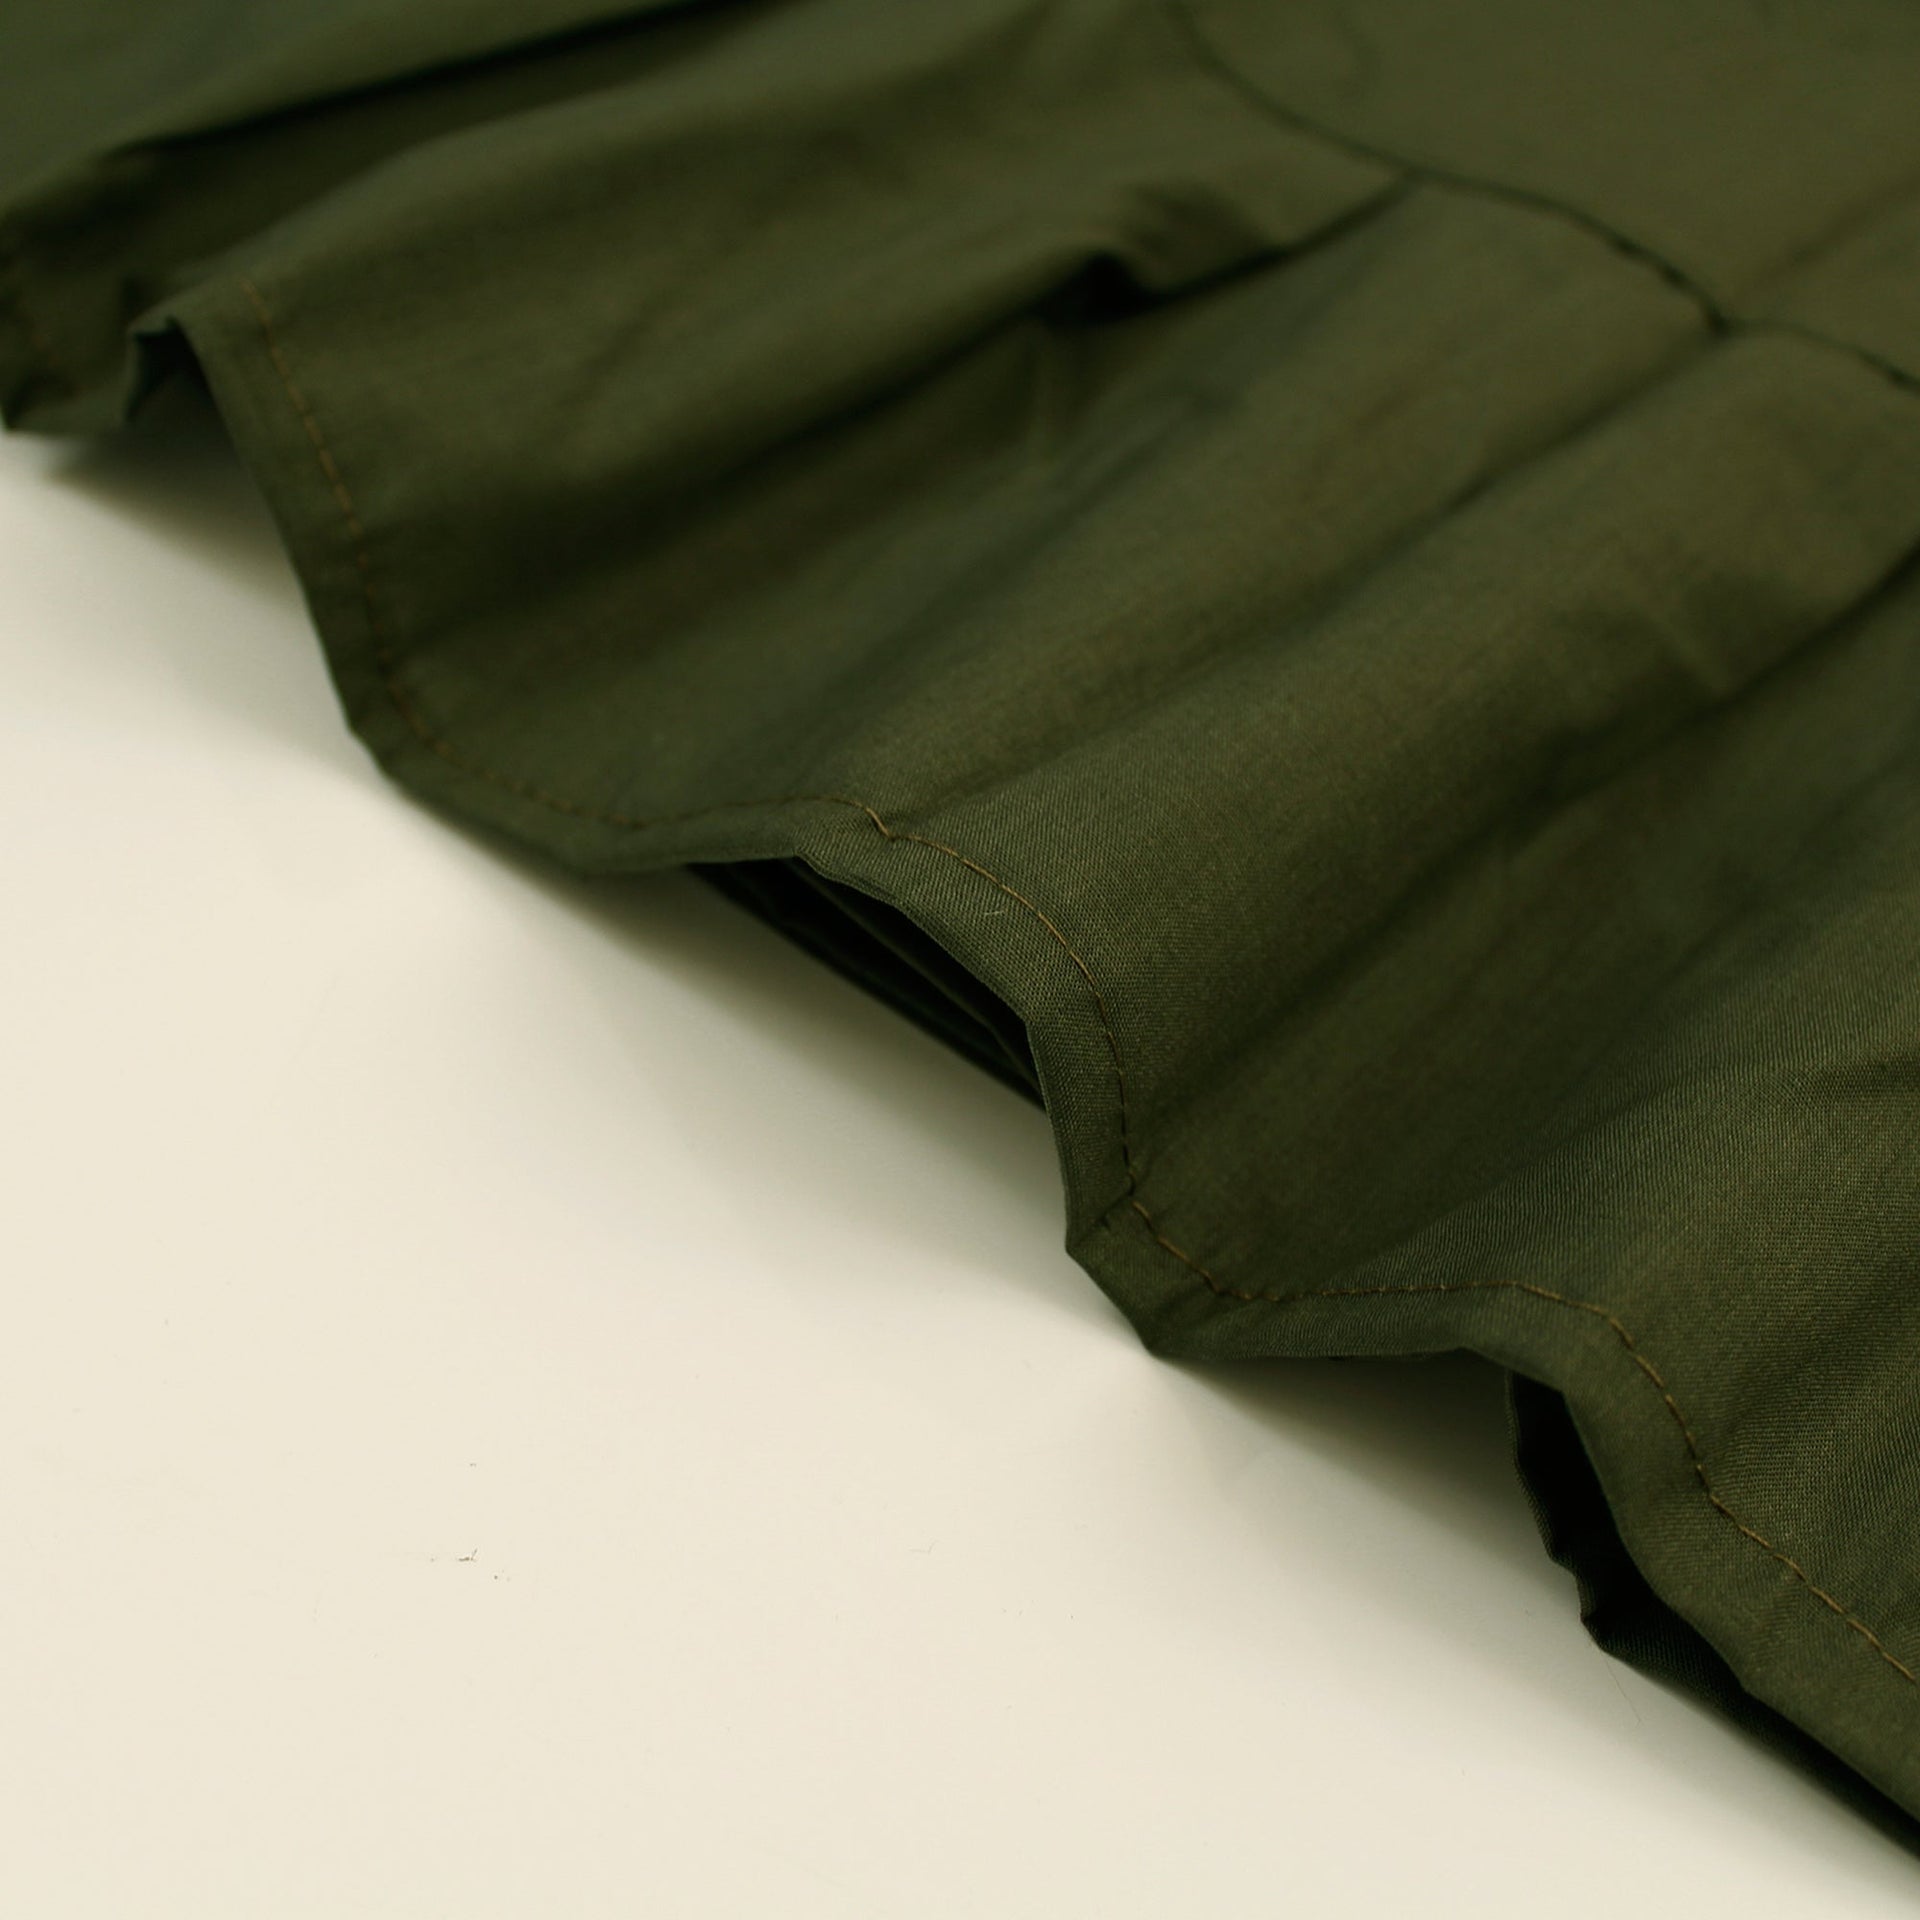 Solid Color Cotton Petticoat in Olive Green